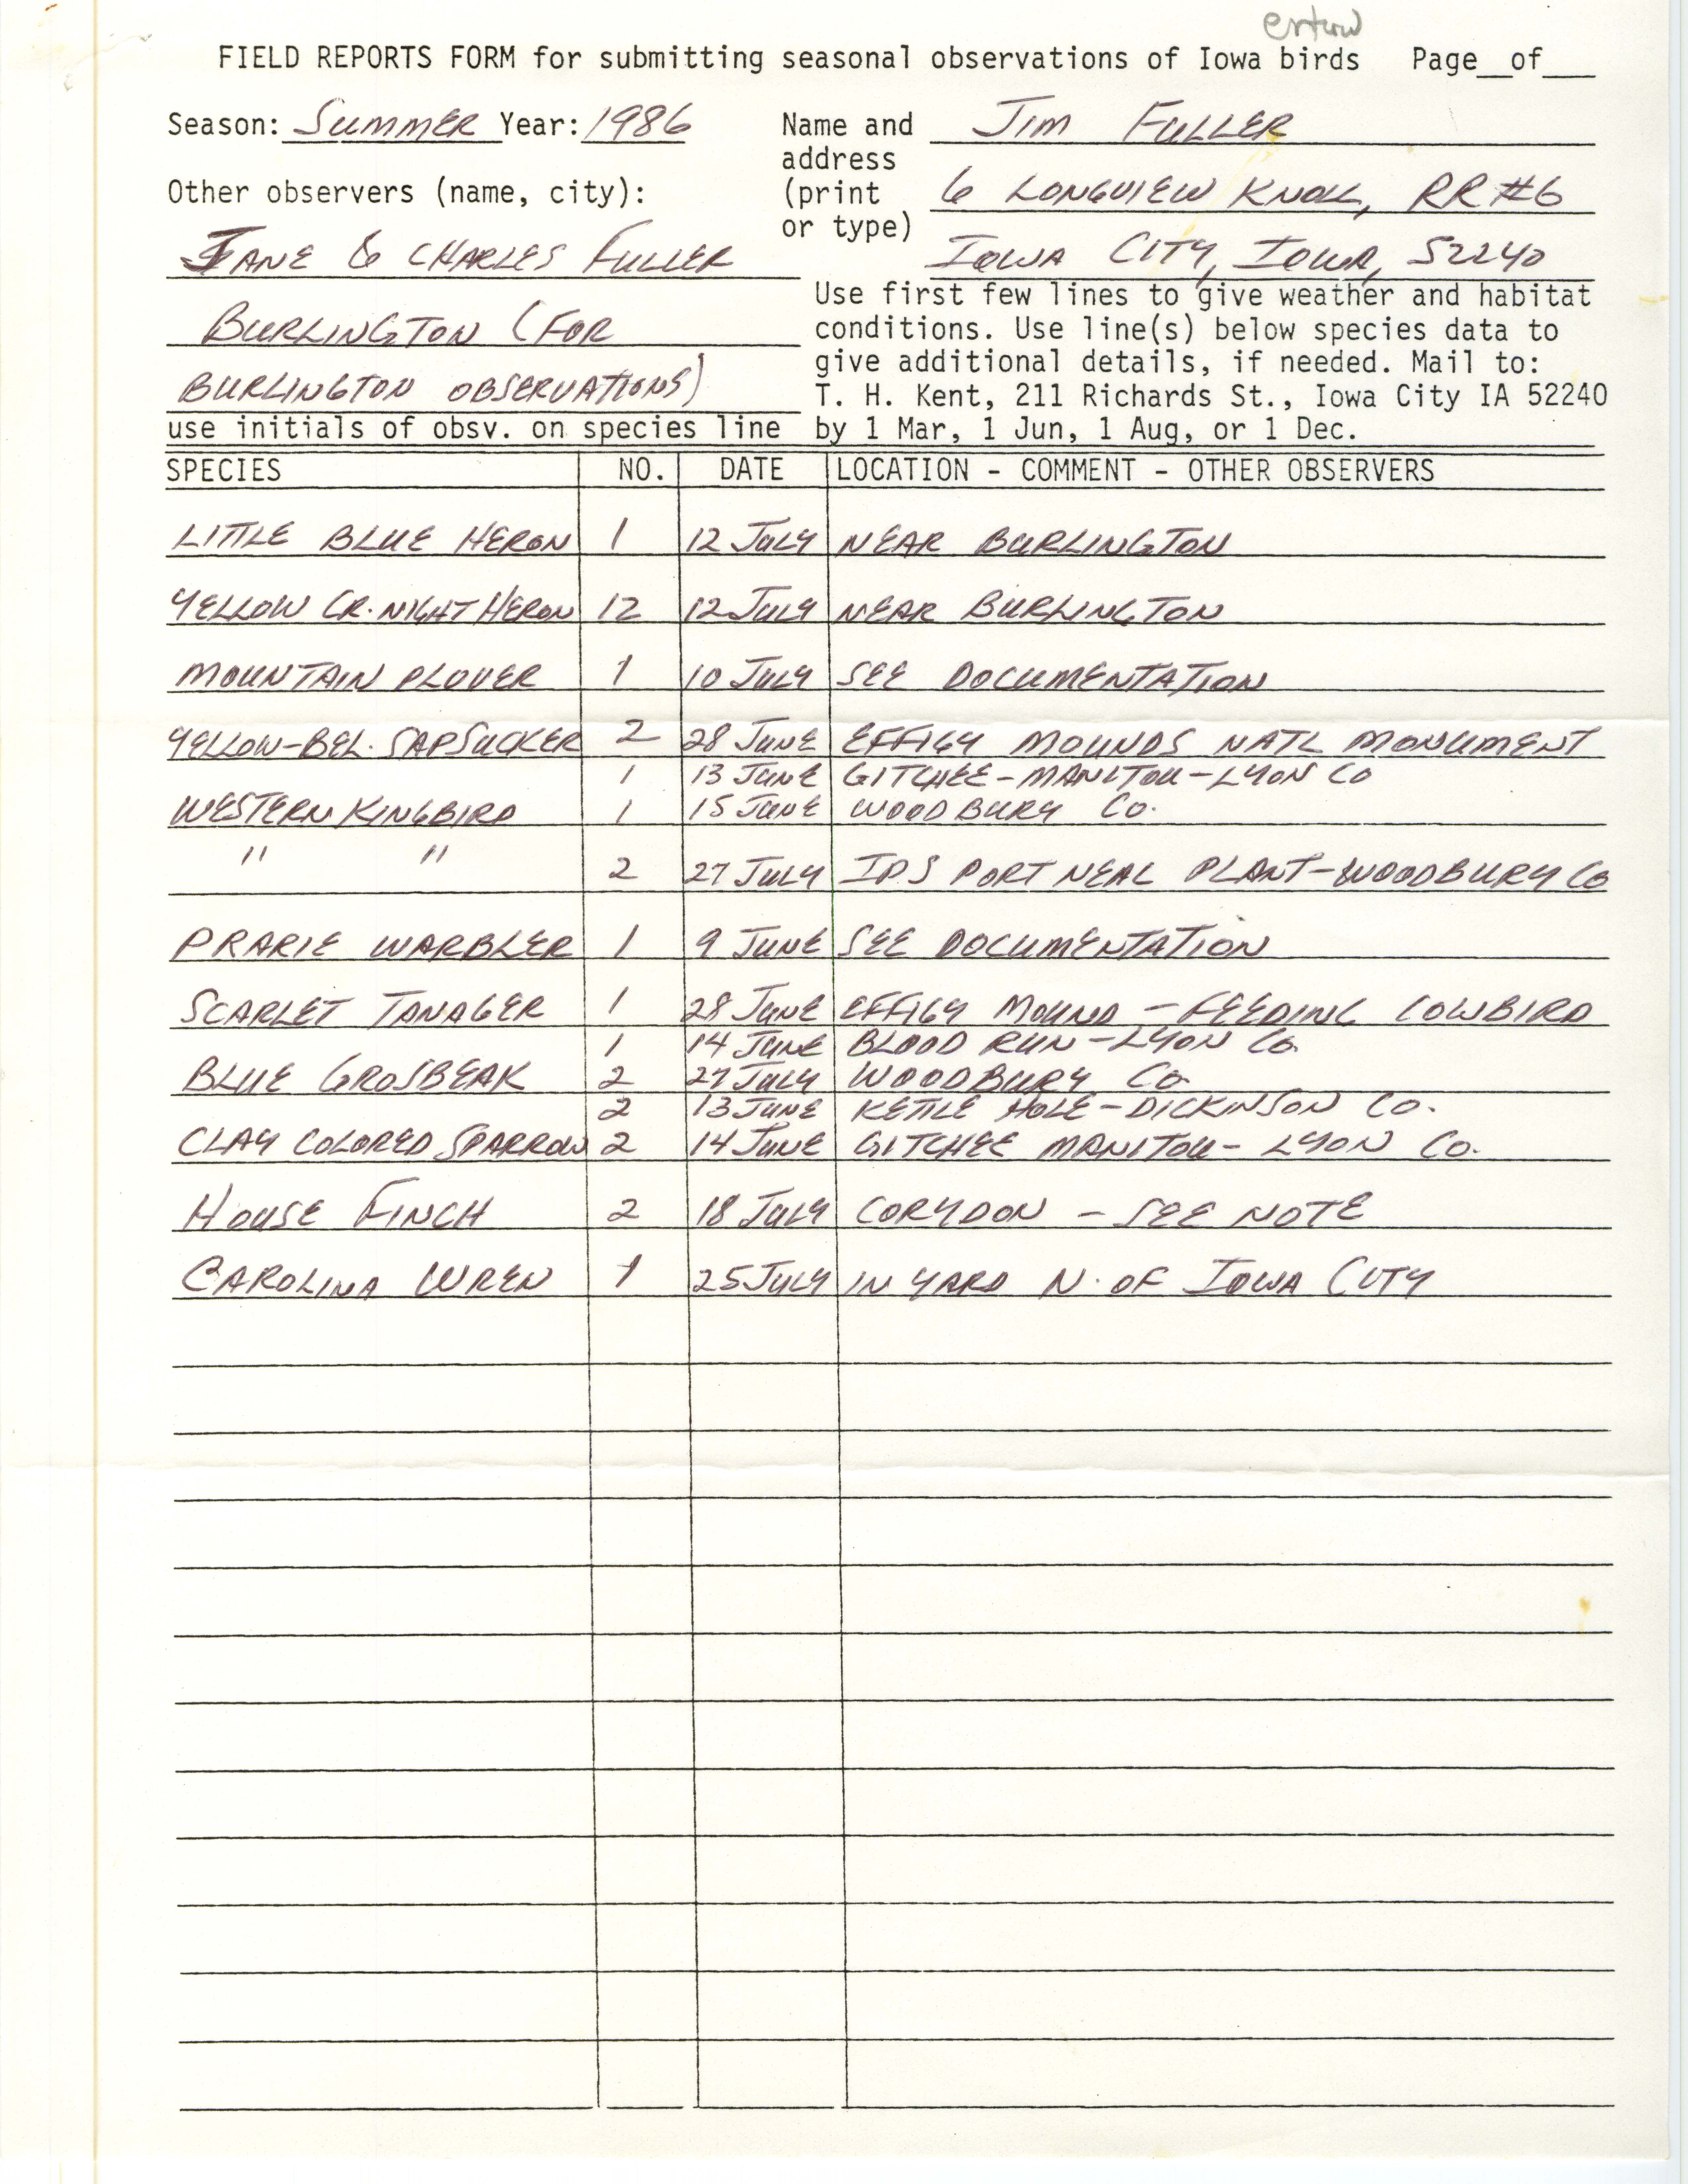 Field reports form for submitting seasonal observations of Iowa birds, James L. Fuller, summer 1986